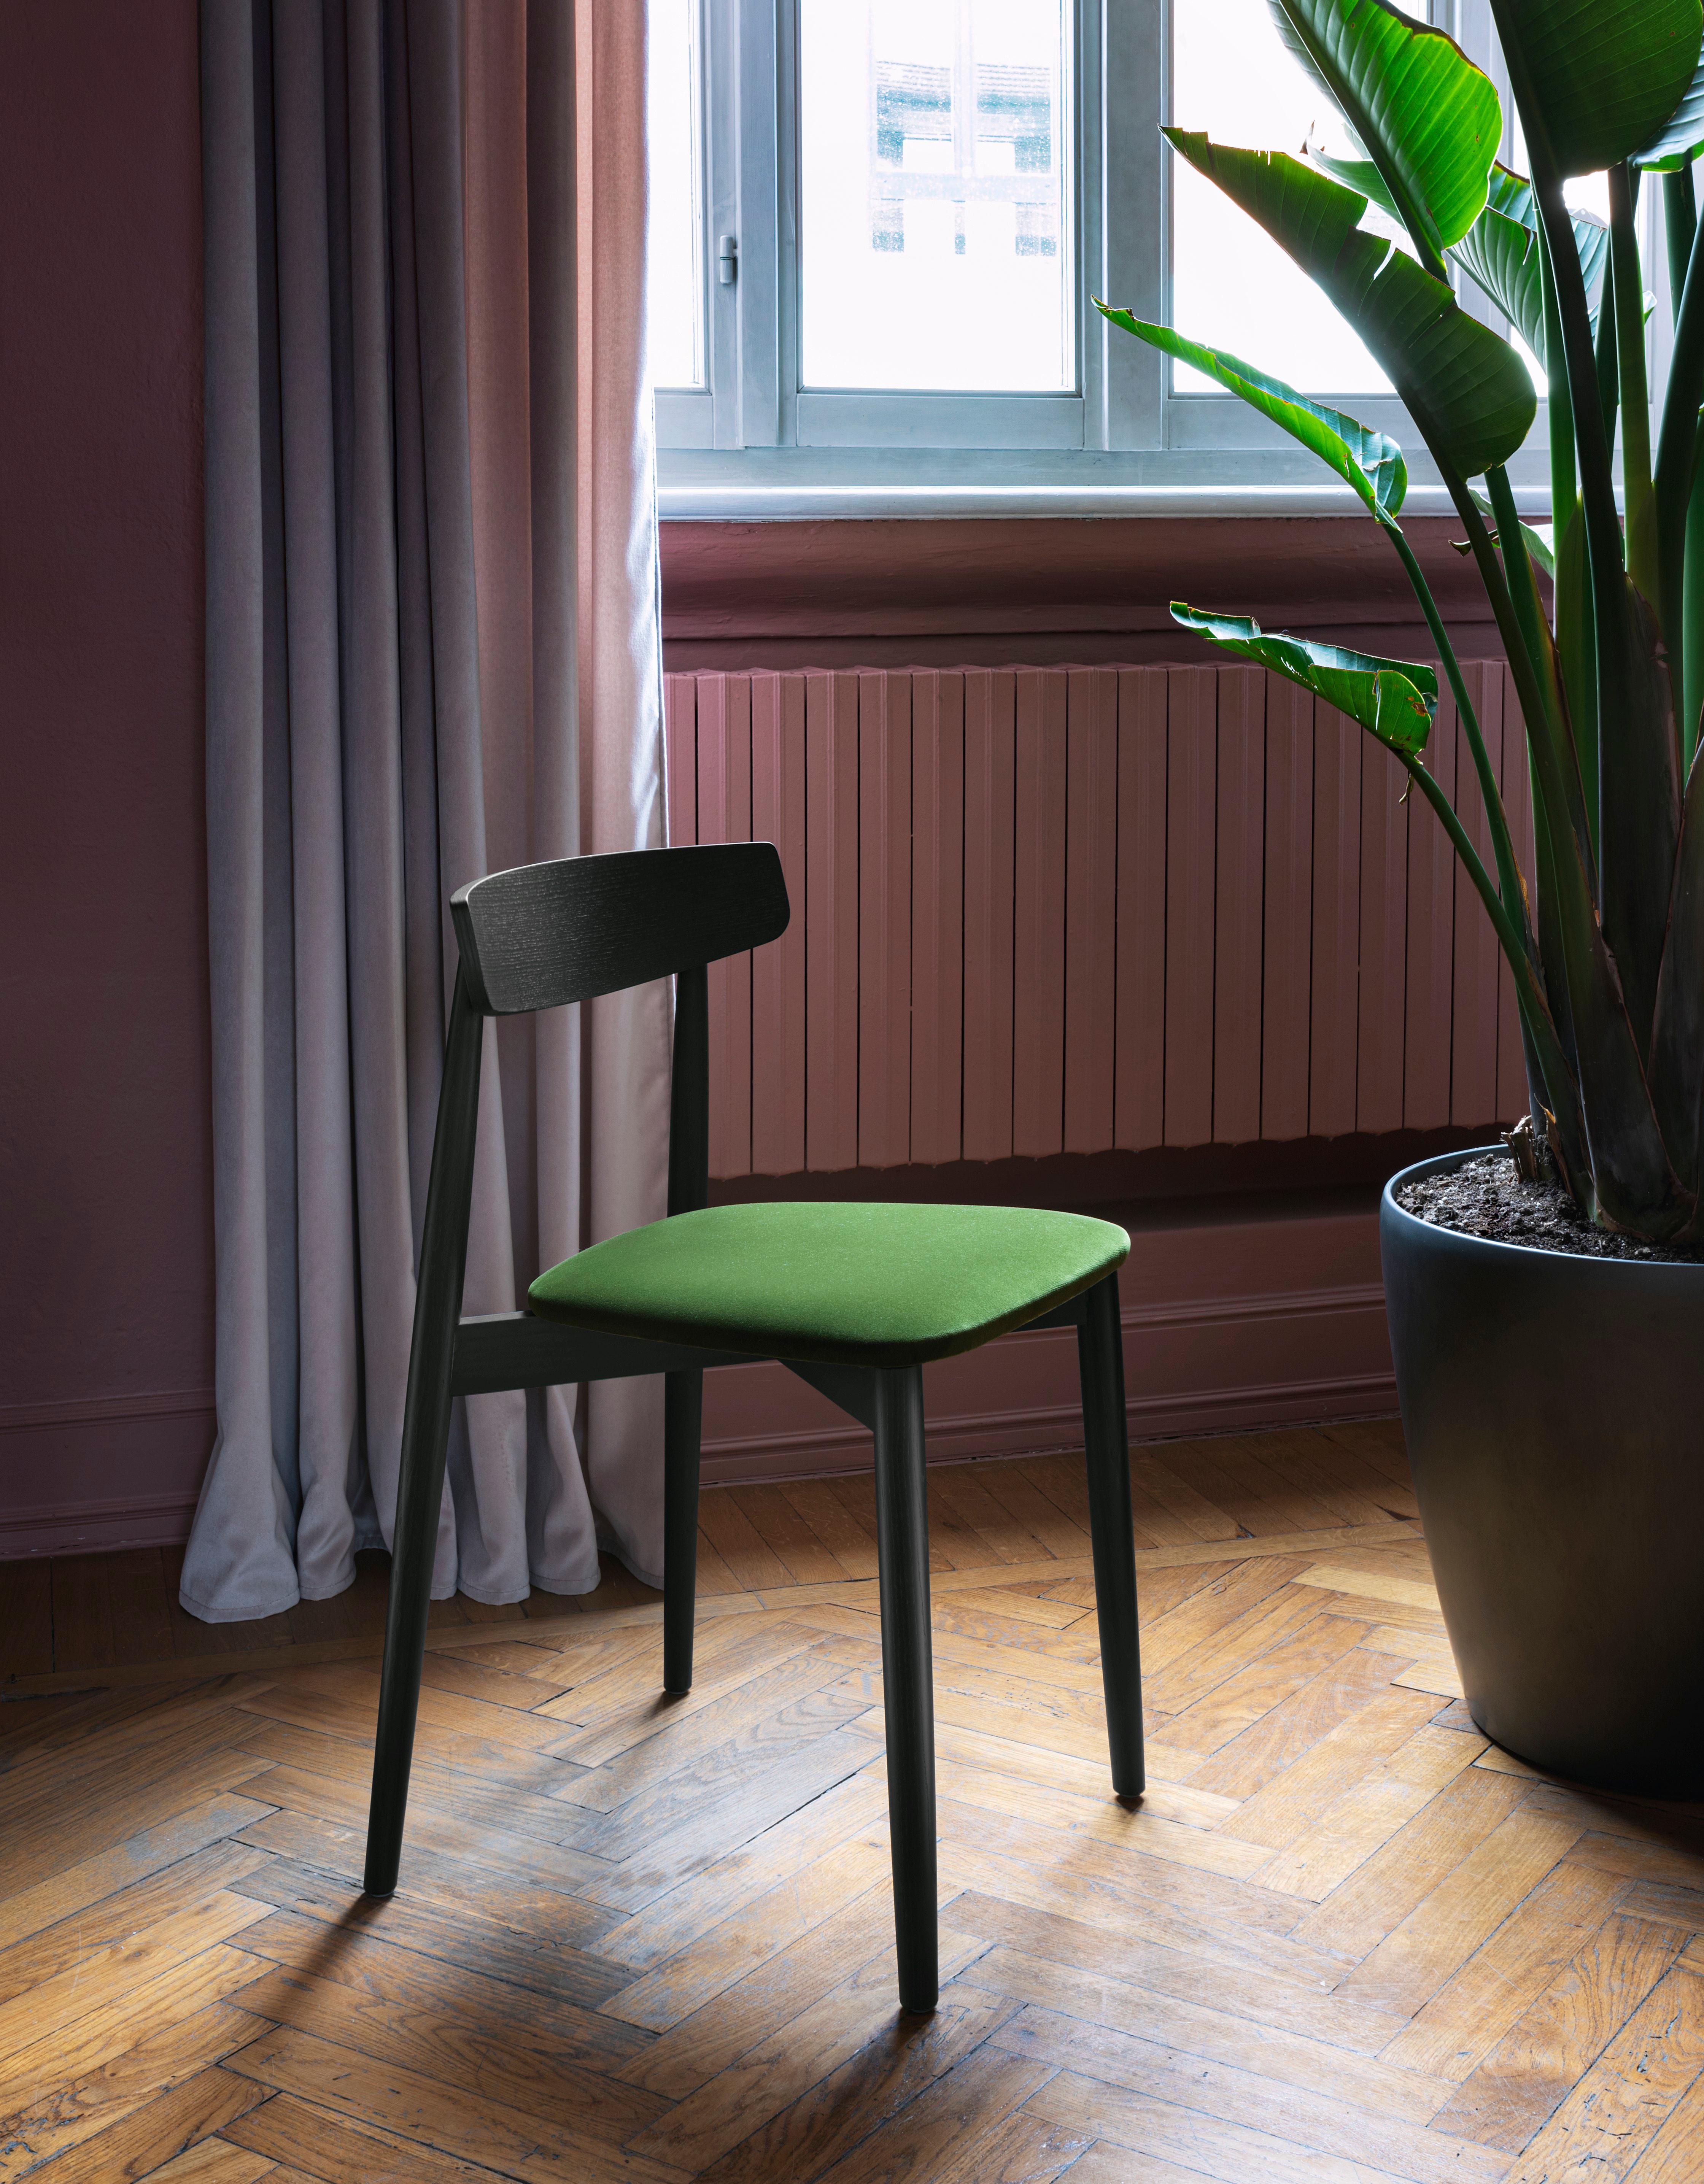 Parisian in character and drawing its inspiration from the traditional bistro chair, Claretta appears as a slender, impeccably groomed seat. The design is simple yet sports essential details, such as the assertive way in which the turned legs join